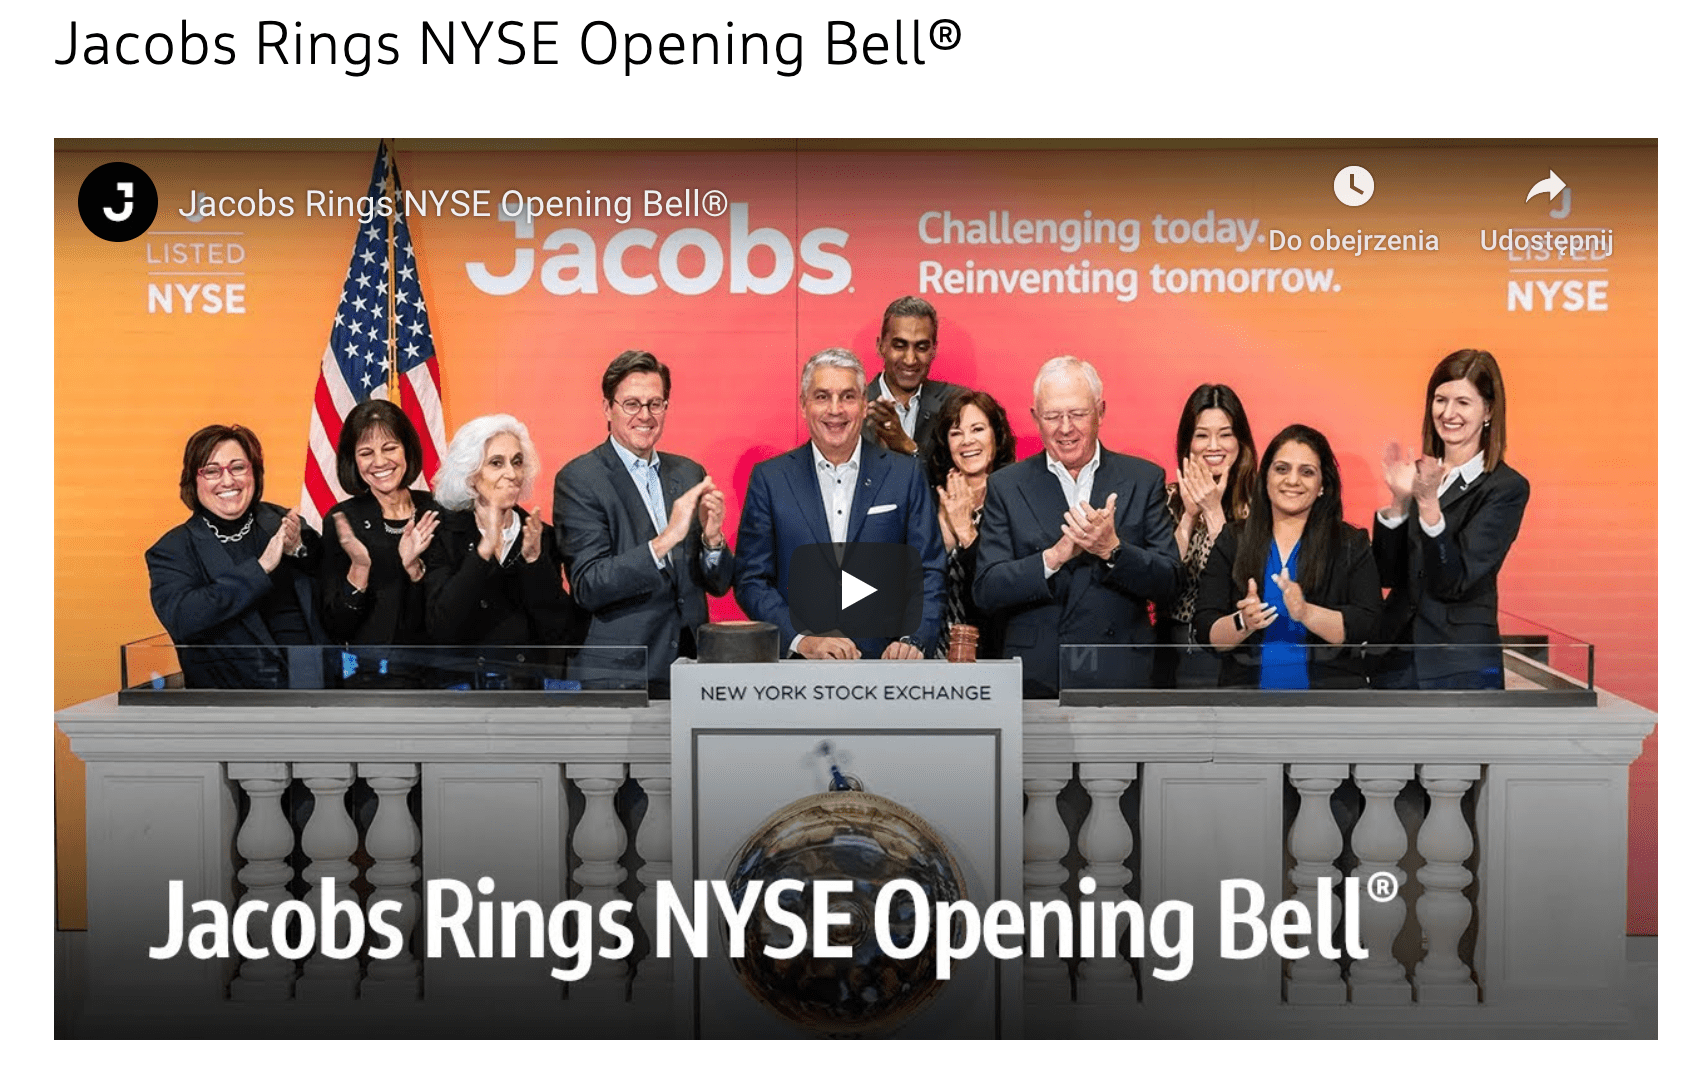 Jacobs 1 stock bell